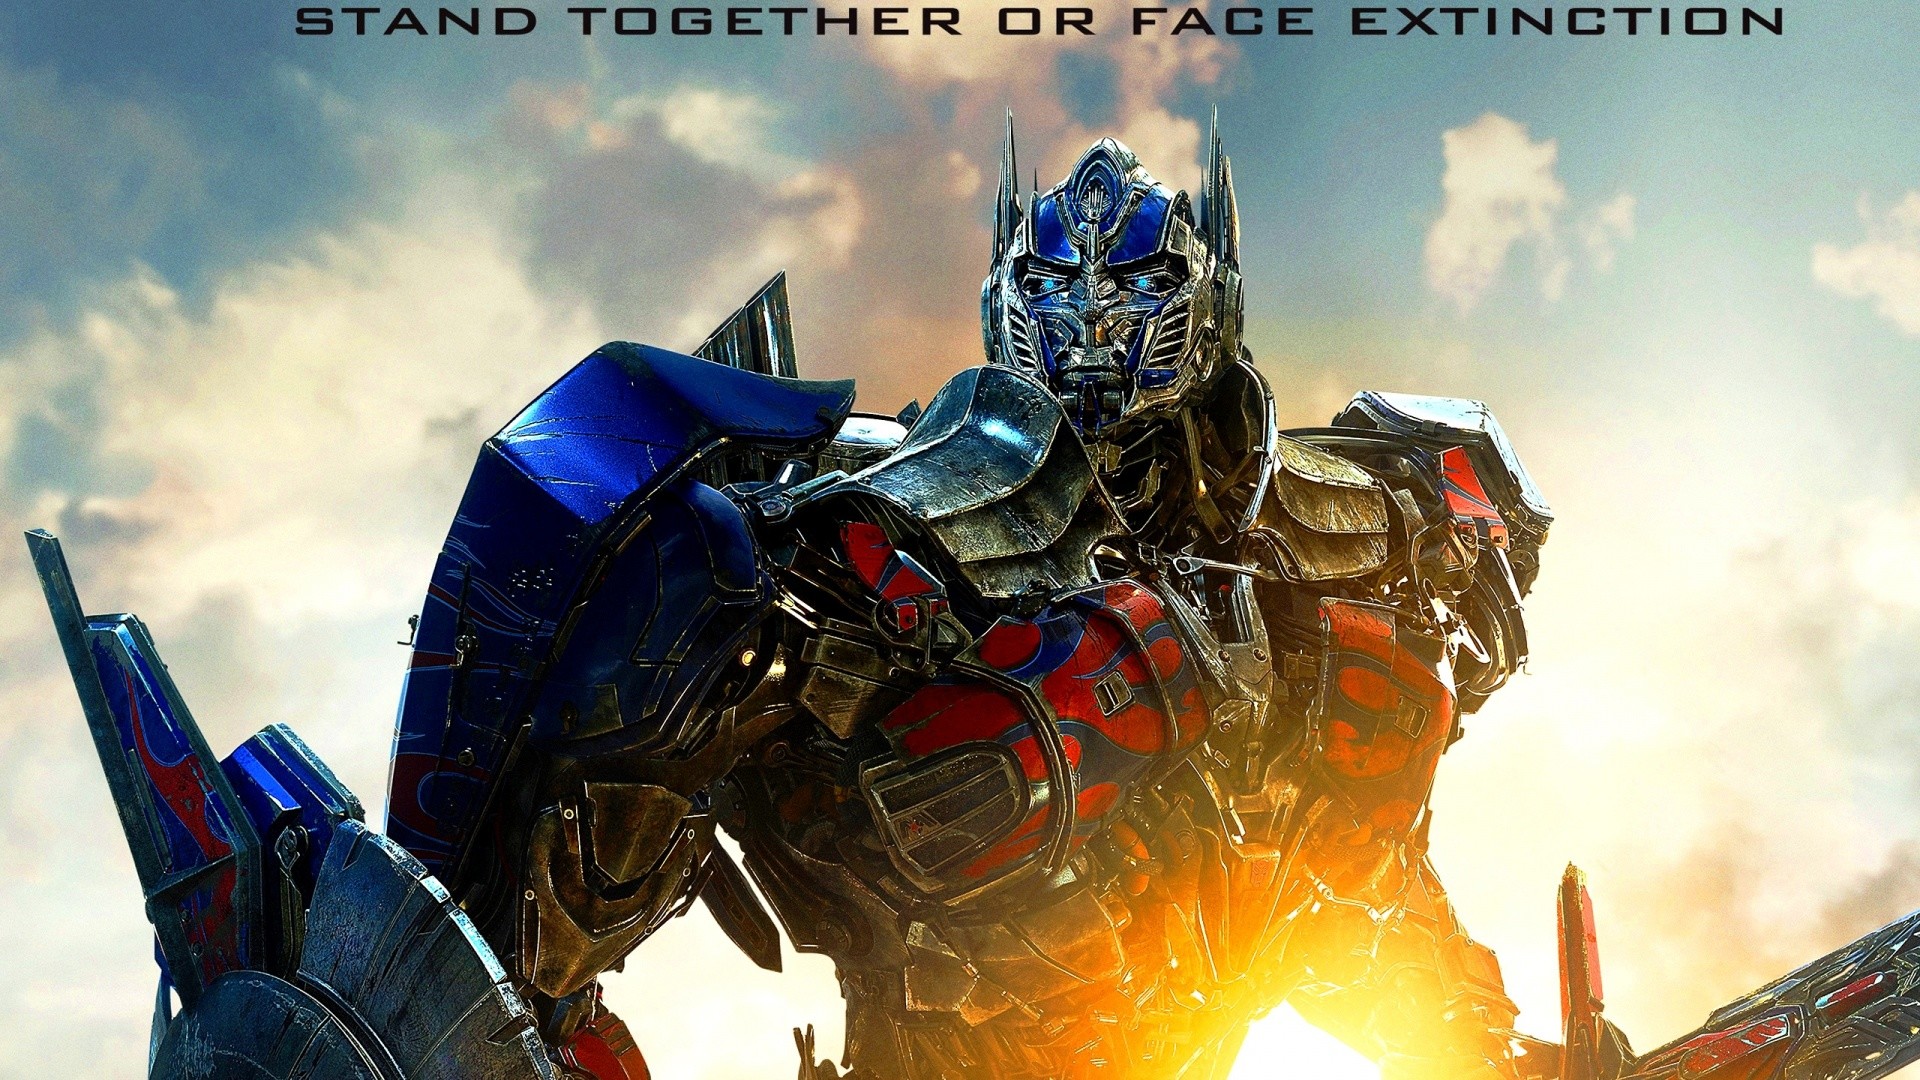 1920x1080 Transformers Age Of Extinction Hd Wallpaper [1920 x 1080] Need #iPhone #6S  #Plus #Wallpaper/ #Background for #IPhone6SPlus? Follow iPhone 6S Plus 3…